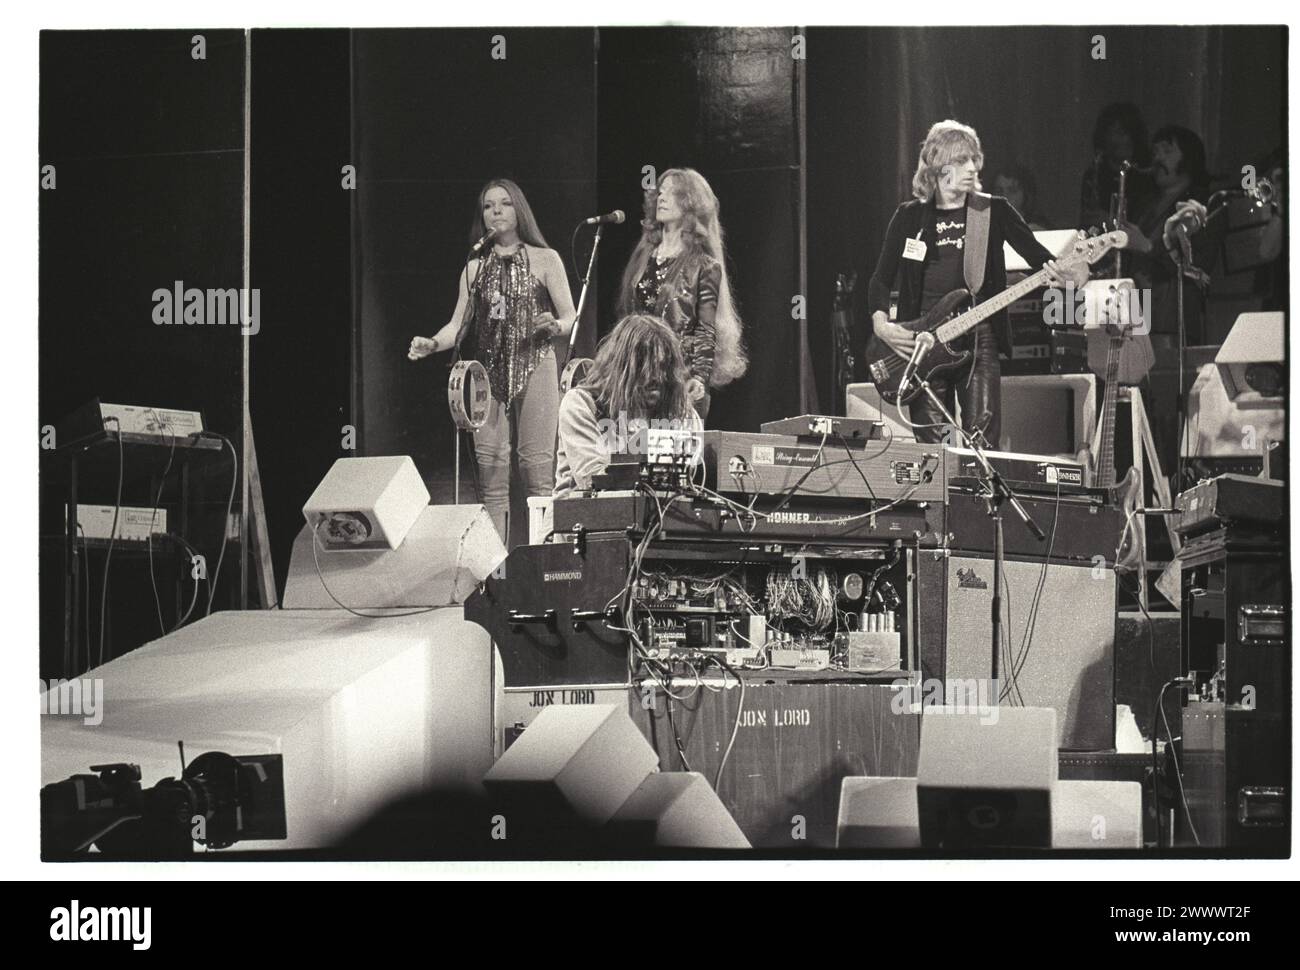 Paice Ashton Lord on stage, Birmingham, 1977. Jon Lord and bassist Paul Martinez, plus backing singers.  This was the band's only tour after Jon Lord and Ian Paice left Deep Purple the year before. It promoted their only album Malice In Wonderland but the group wasn't successful commercially and the musicians left a year later to join Whitesnake.  Photograph by Simon Robinson Stock Photo